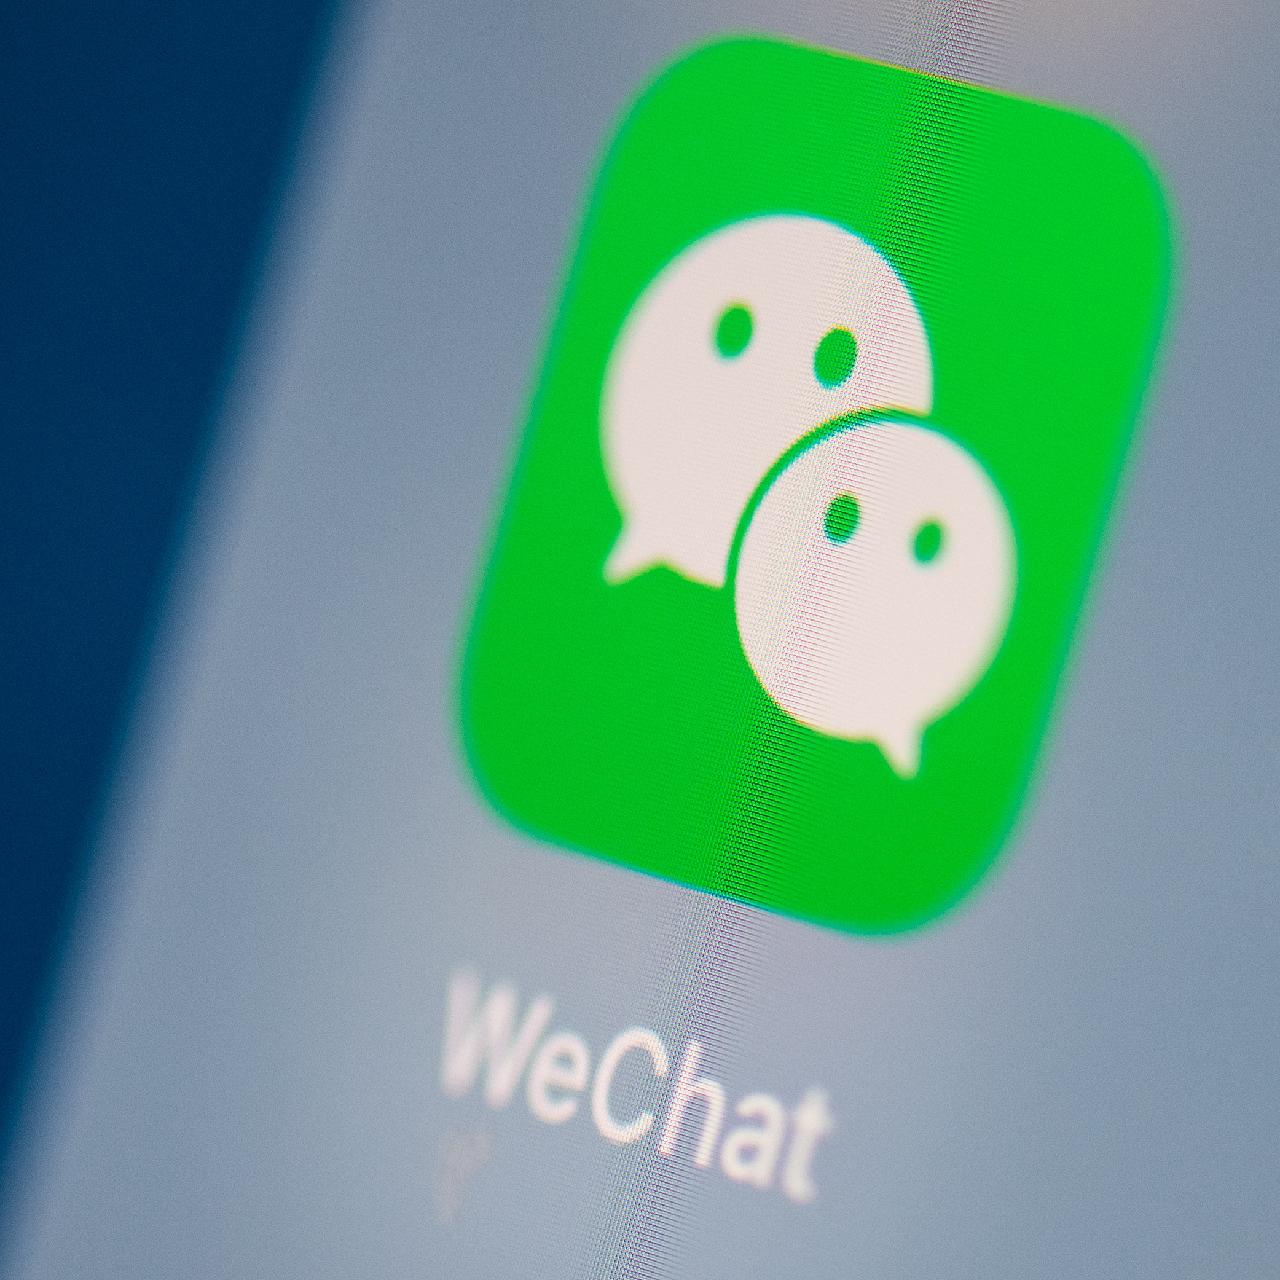 Yokohama apps chat in we what is Is WeChat